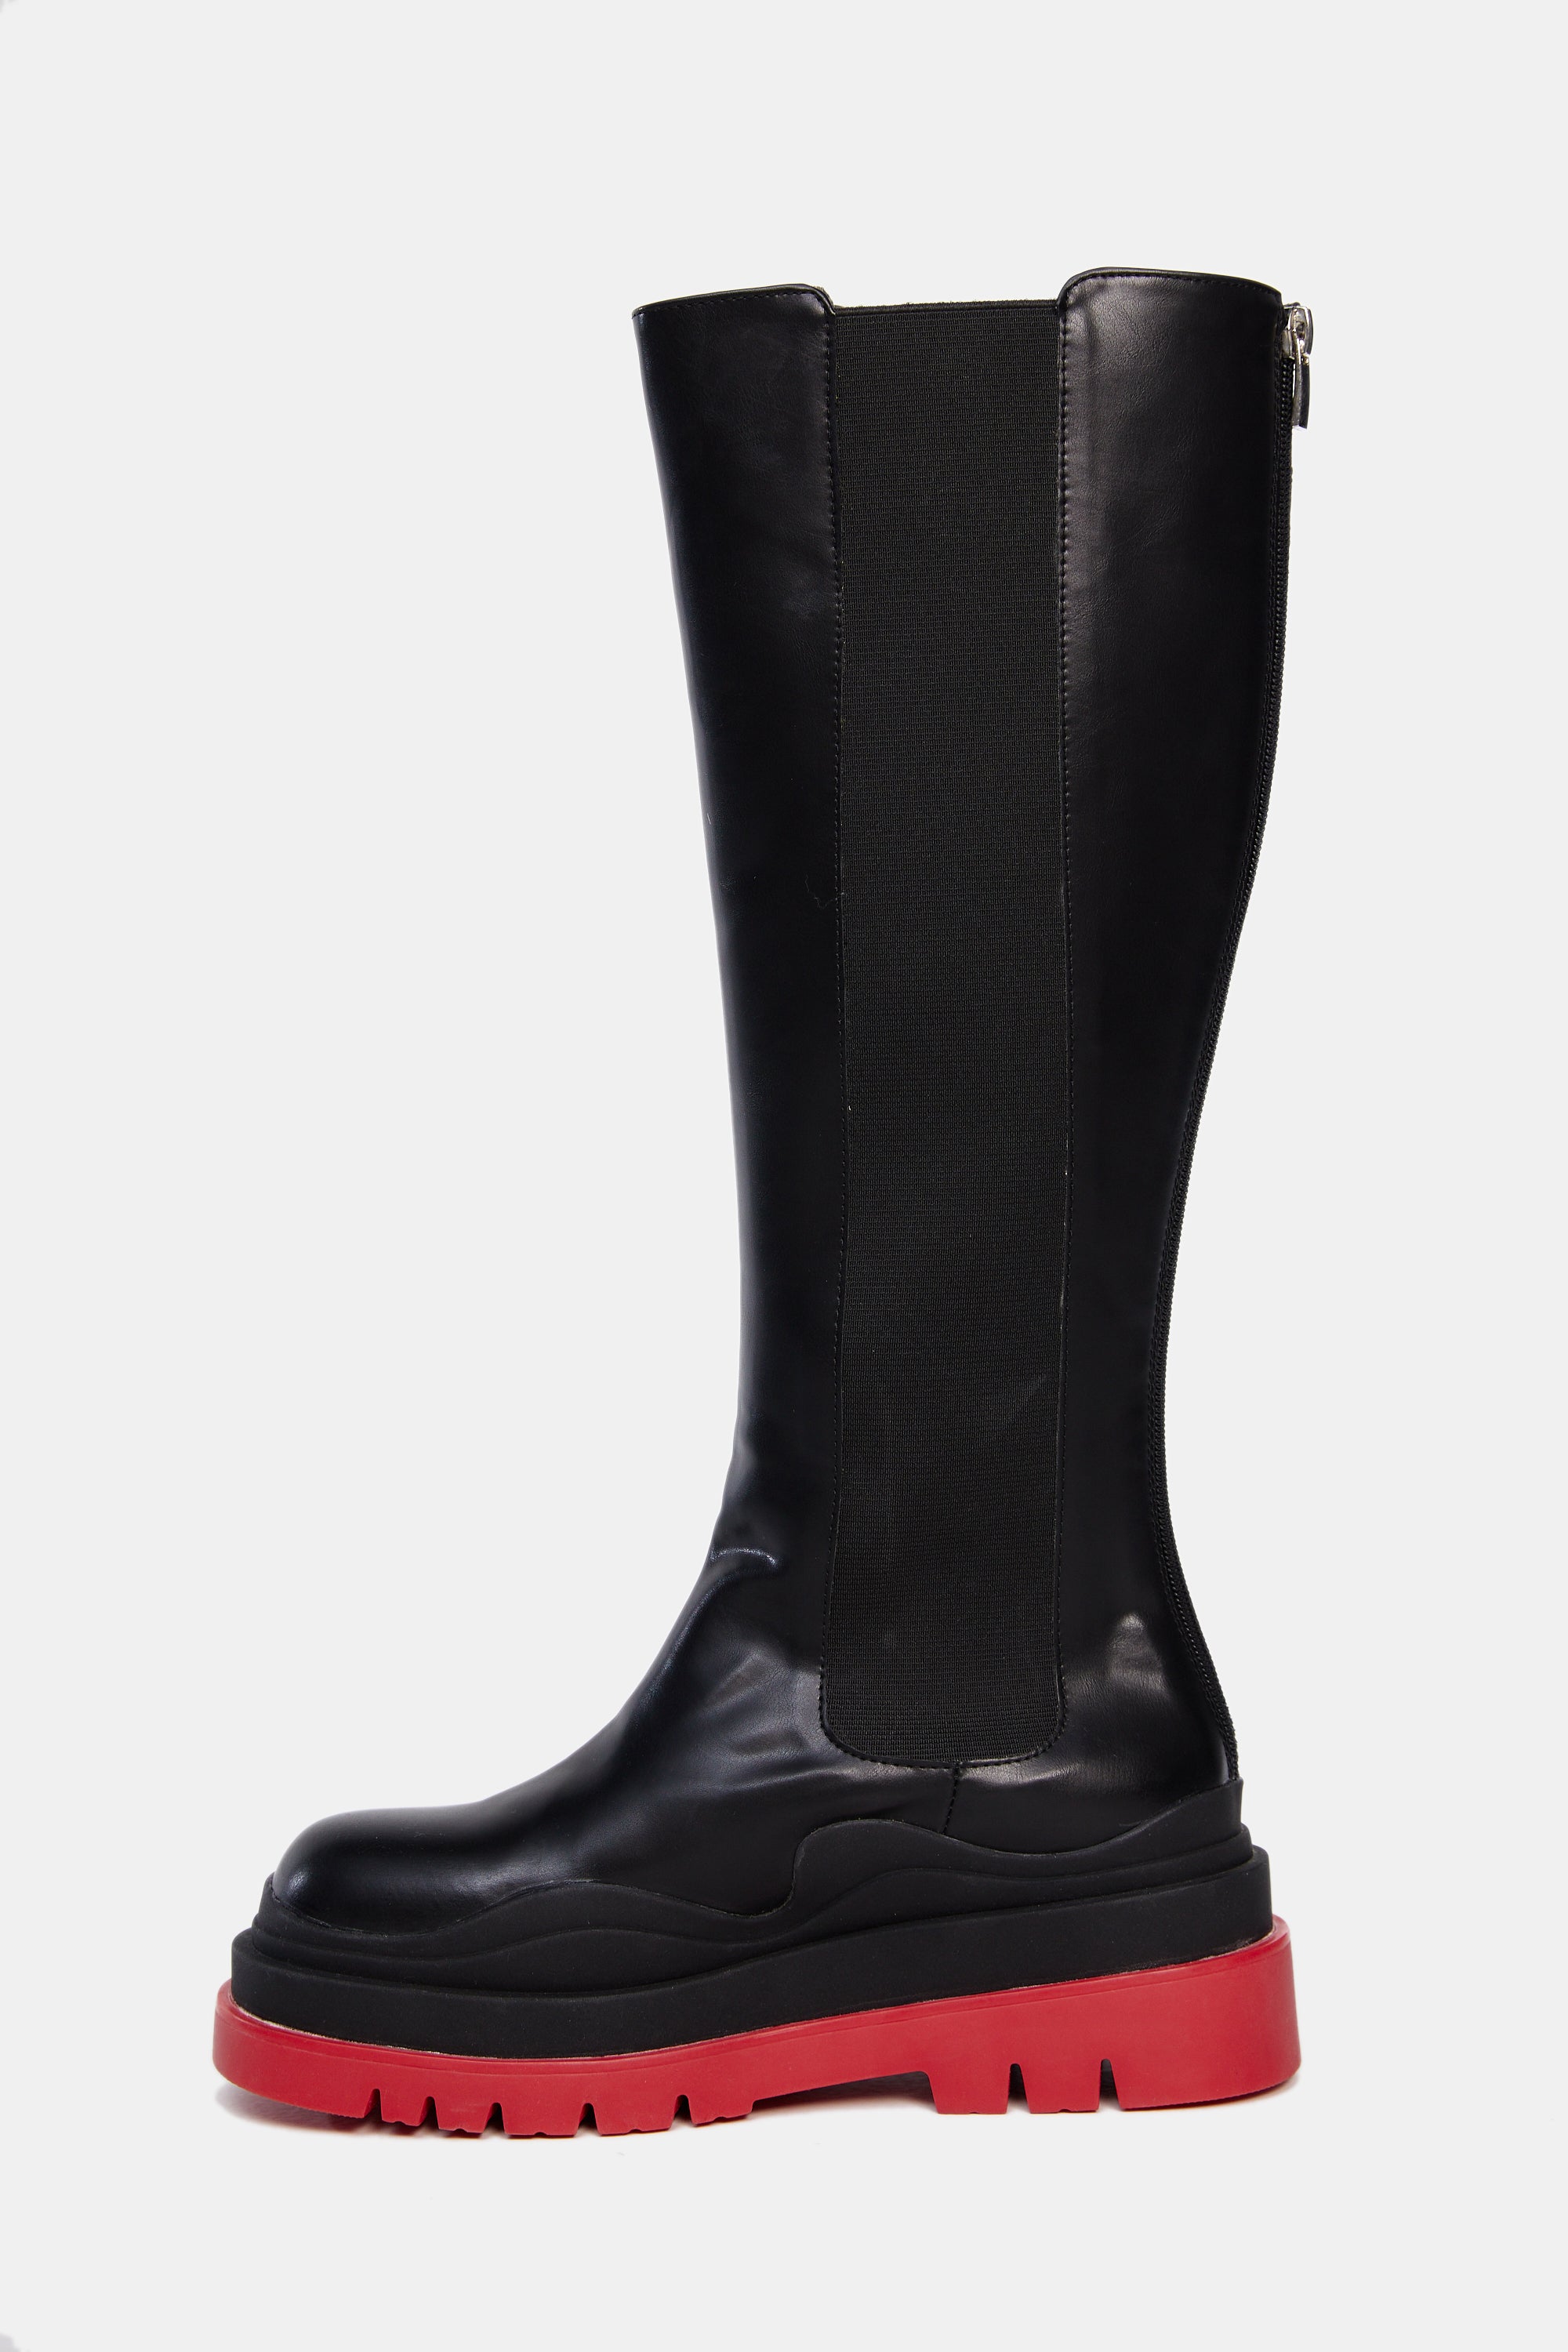 Lug Sole High Knee Boots, Red & Black – SourceUnknown